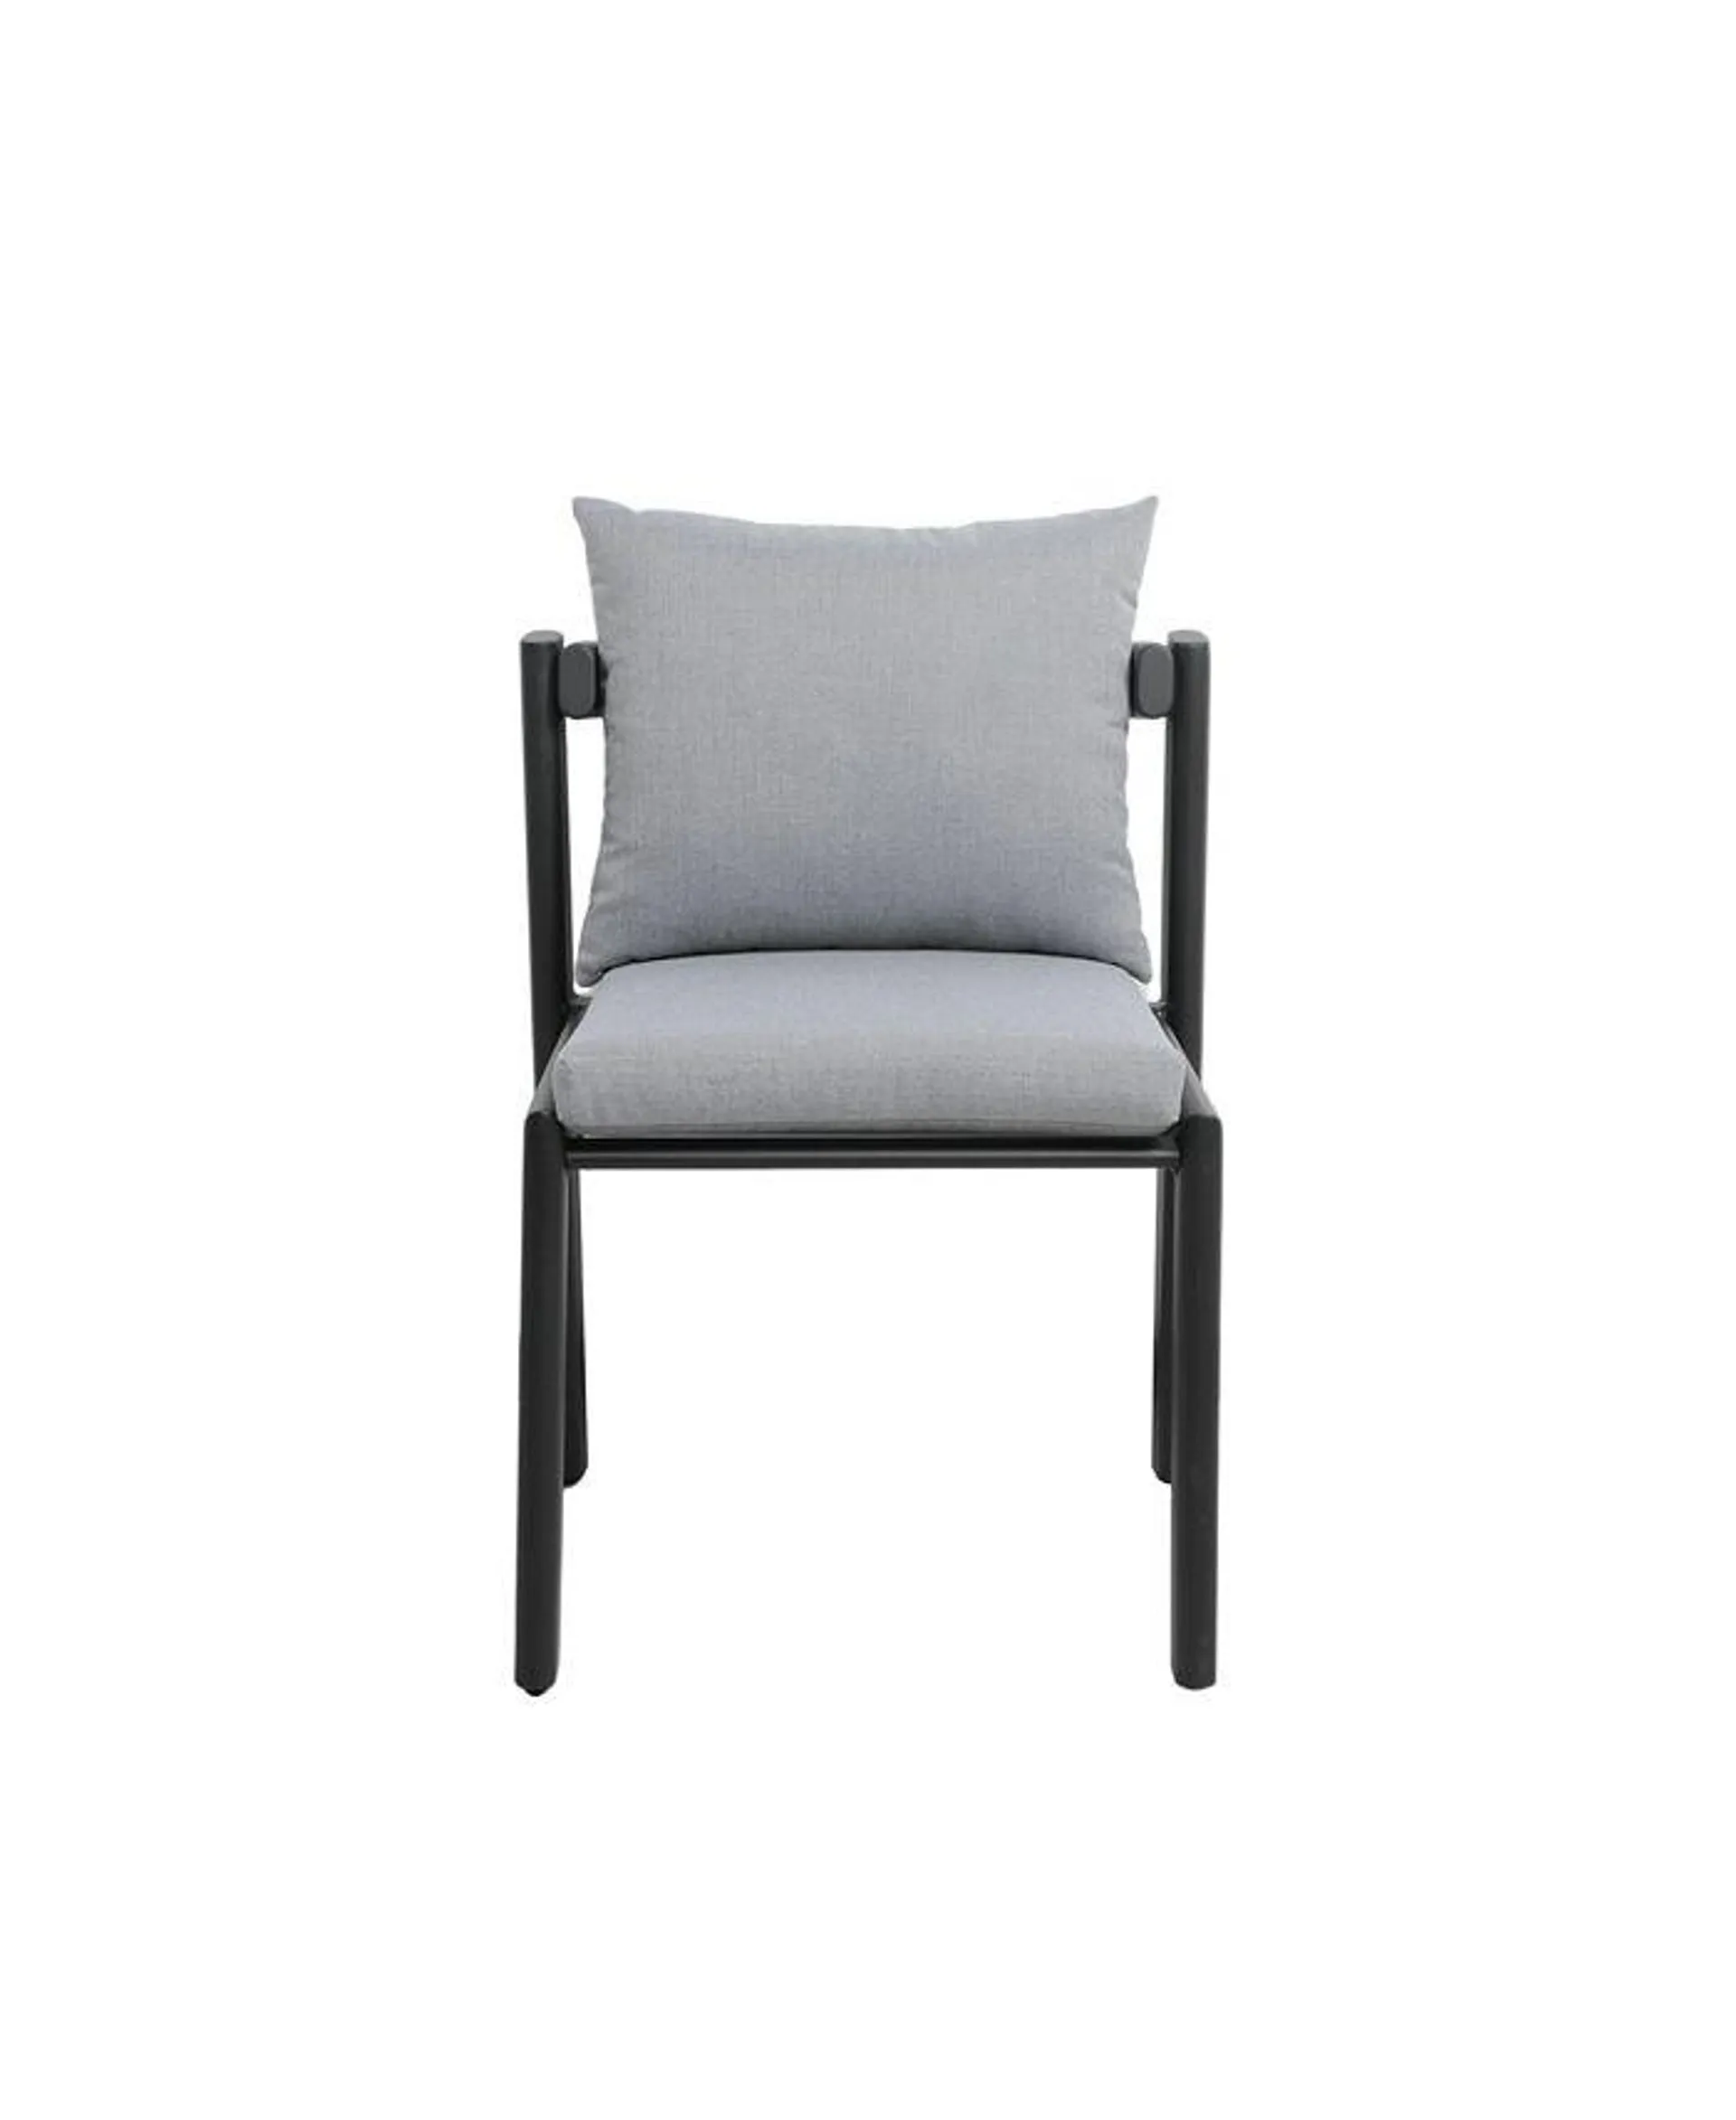 1 Pc. Olefin Outdoor Dining Chair